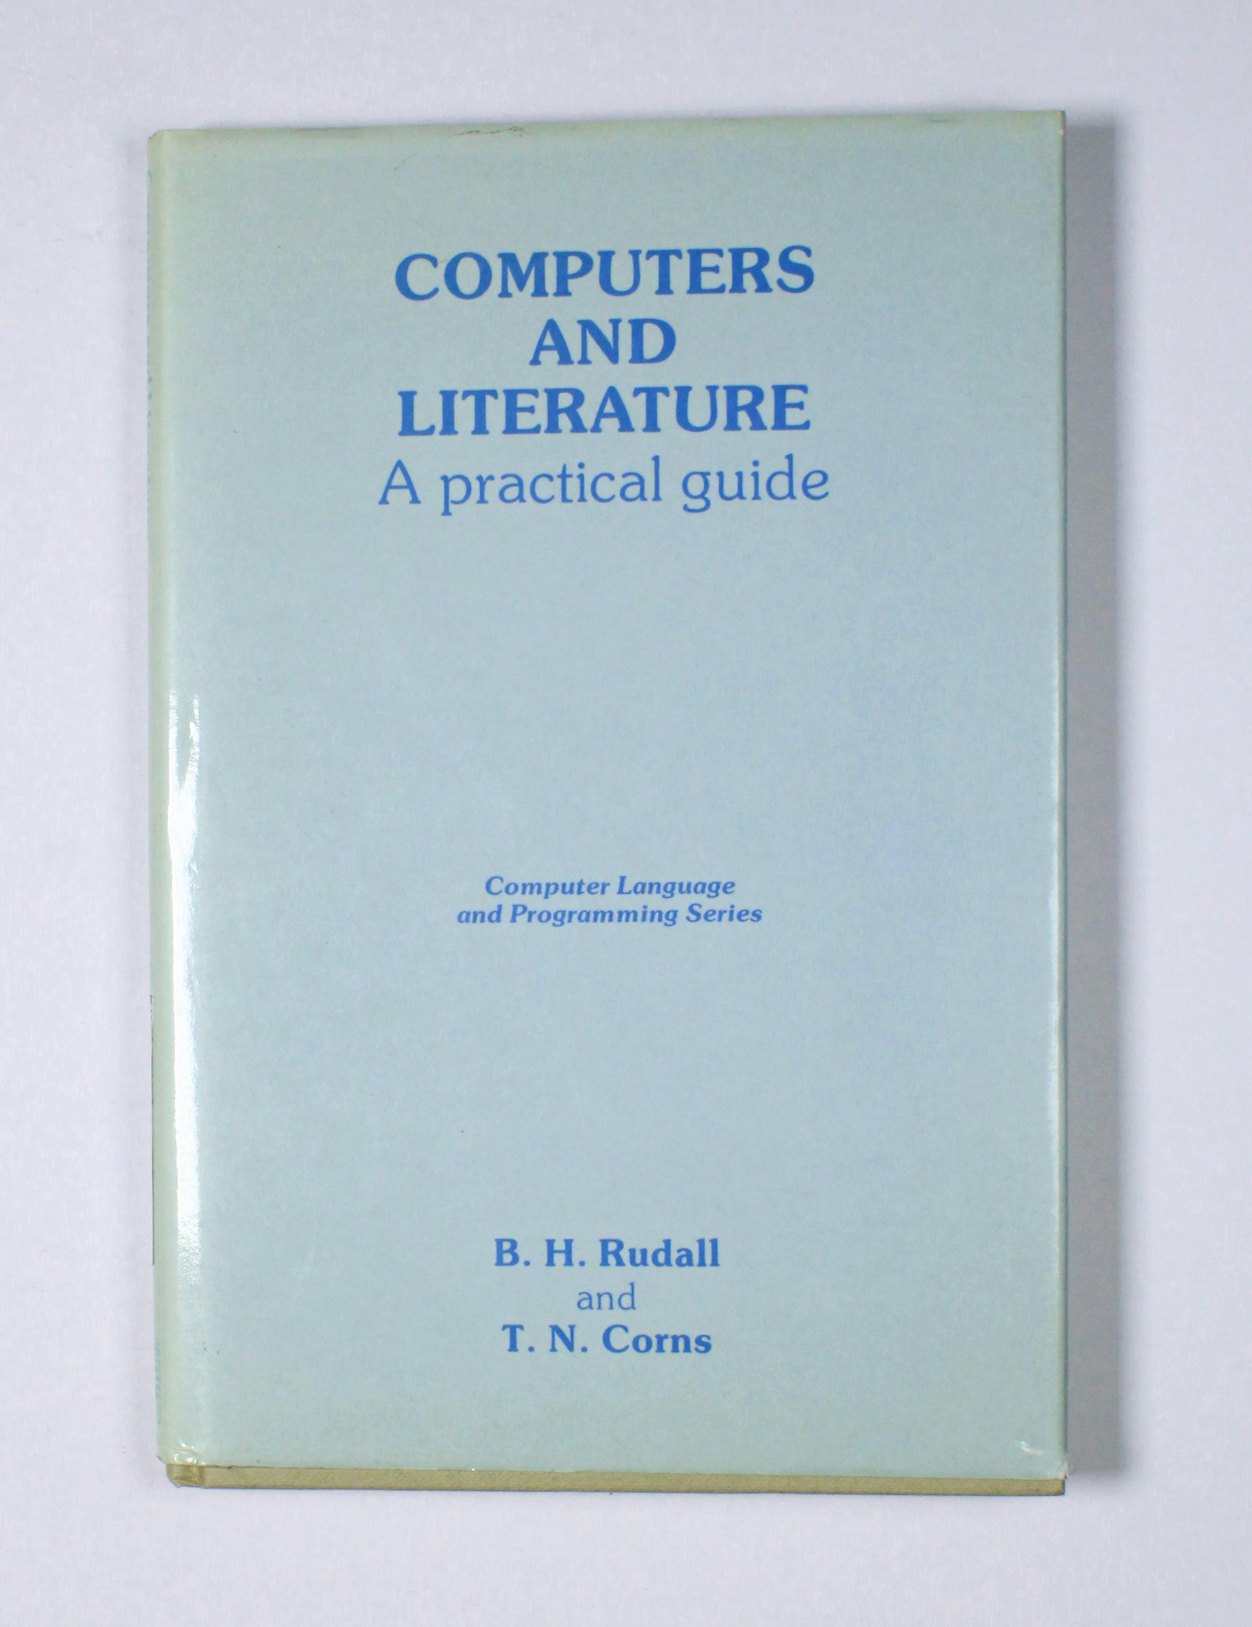 Computers and Literature: A Practical Guide